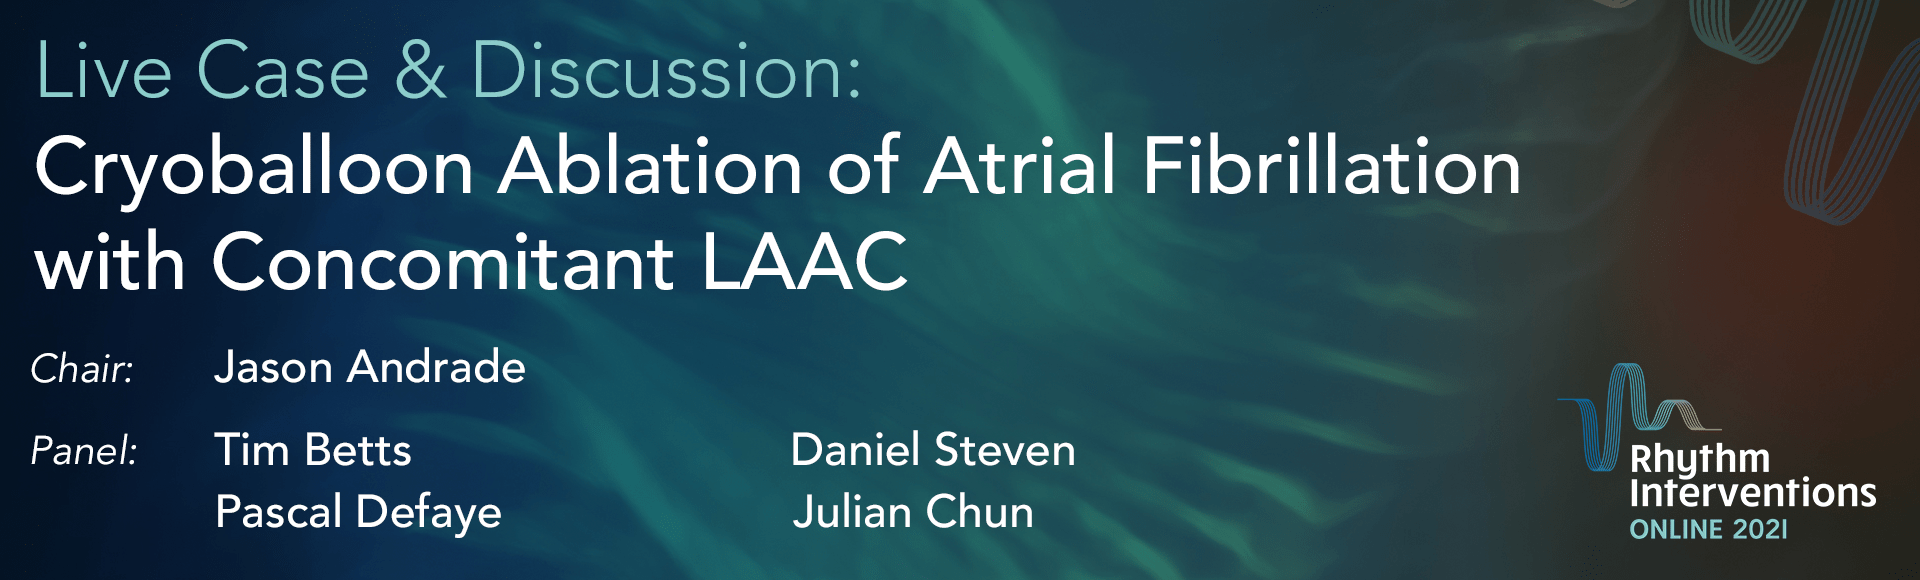 RIO 2021 - Live Case: Cryoballoon Ablation of AF with Concomitant LAAC 